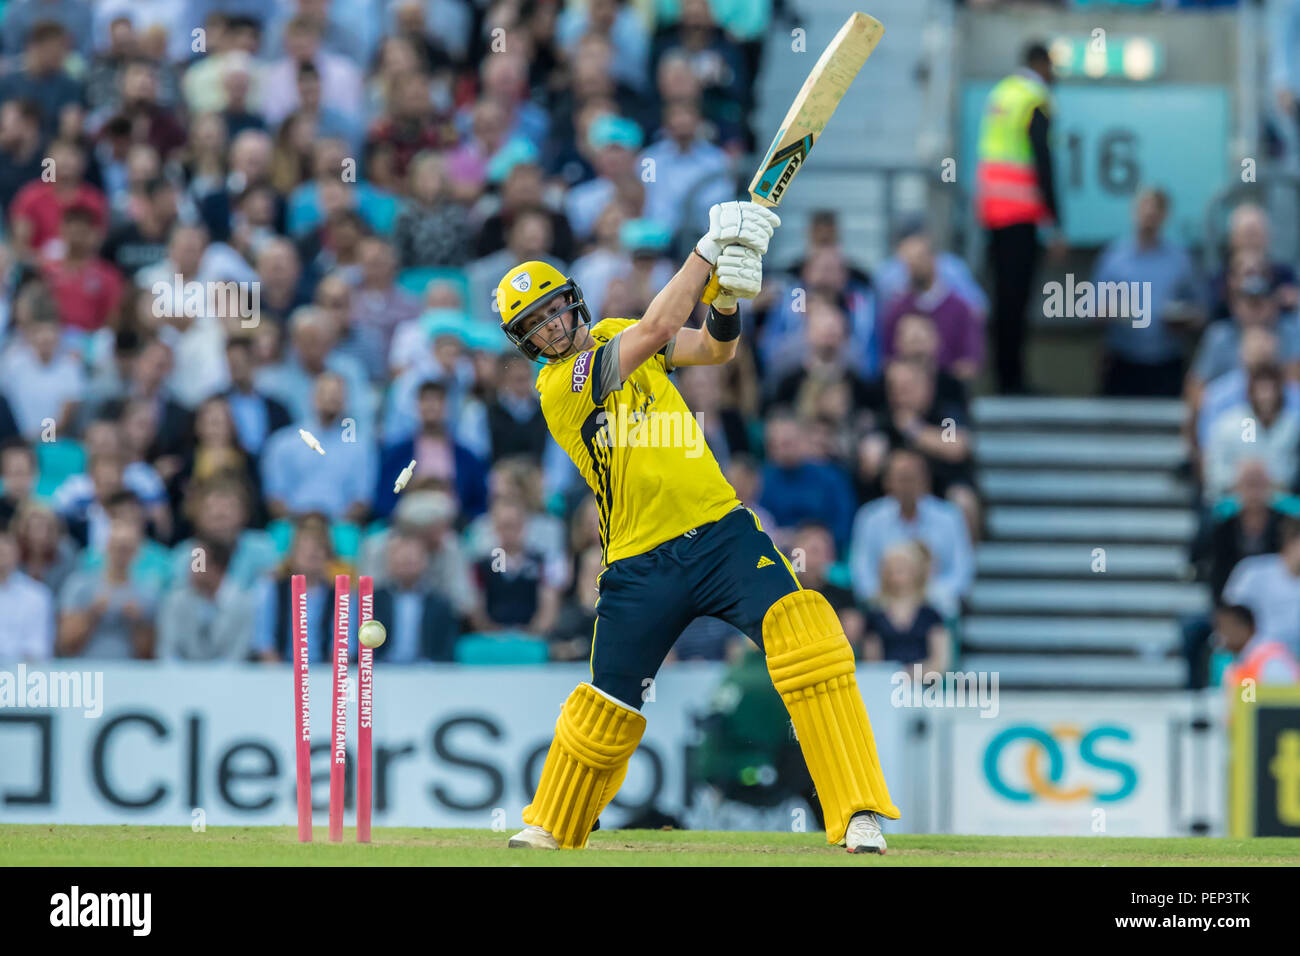 London, UK. 15 August, 2018. Sam Northeast batting for Hampshire, is bowled by Surrey captain Jade Dernbach,  in the Vitality T20 Blast match at the Kia Oval. David Rowe/Alamy Live News Stock Photo